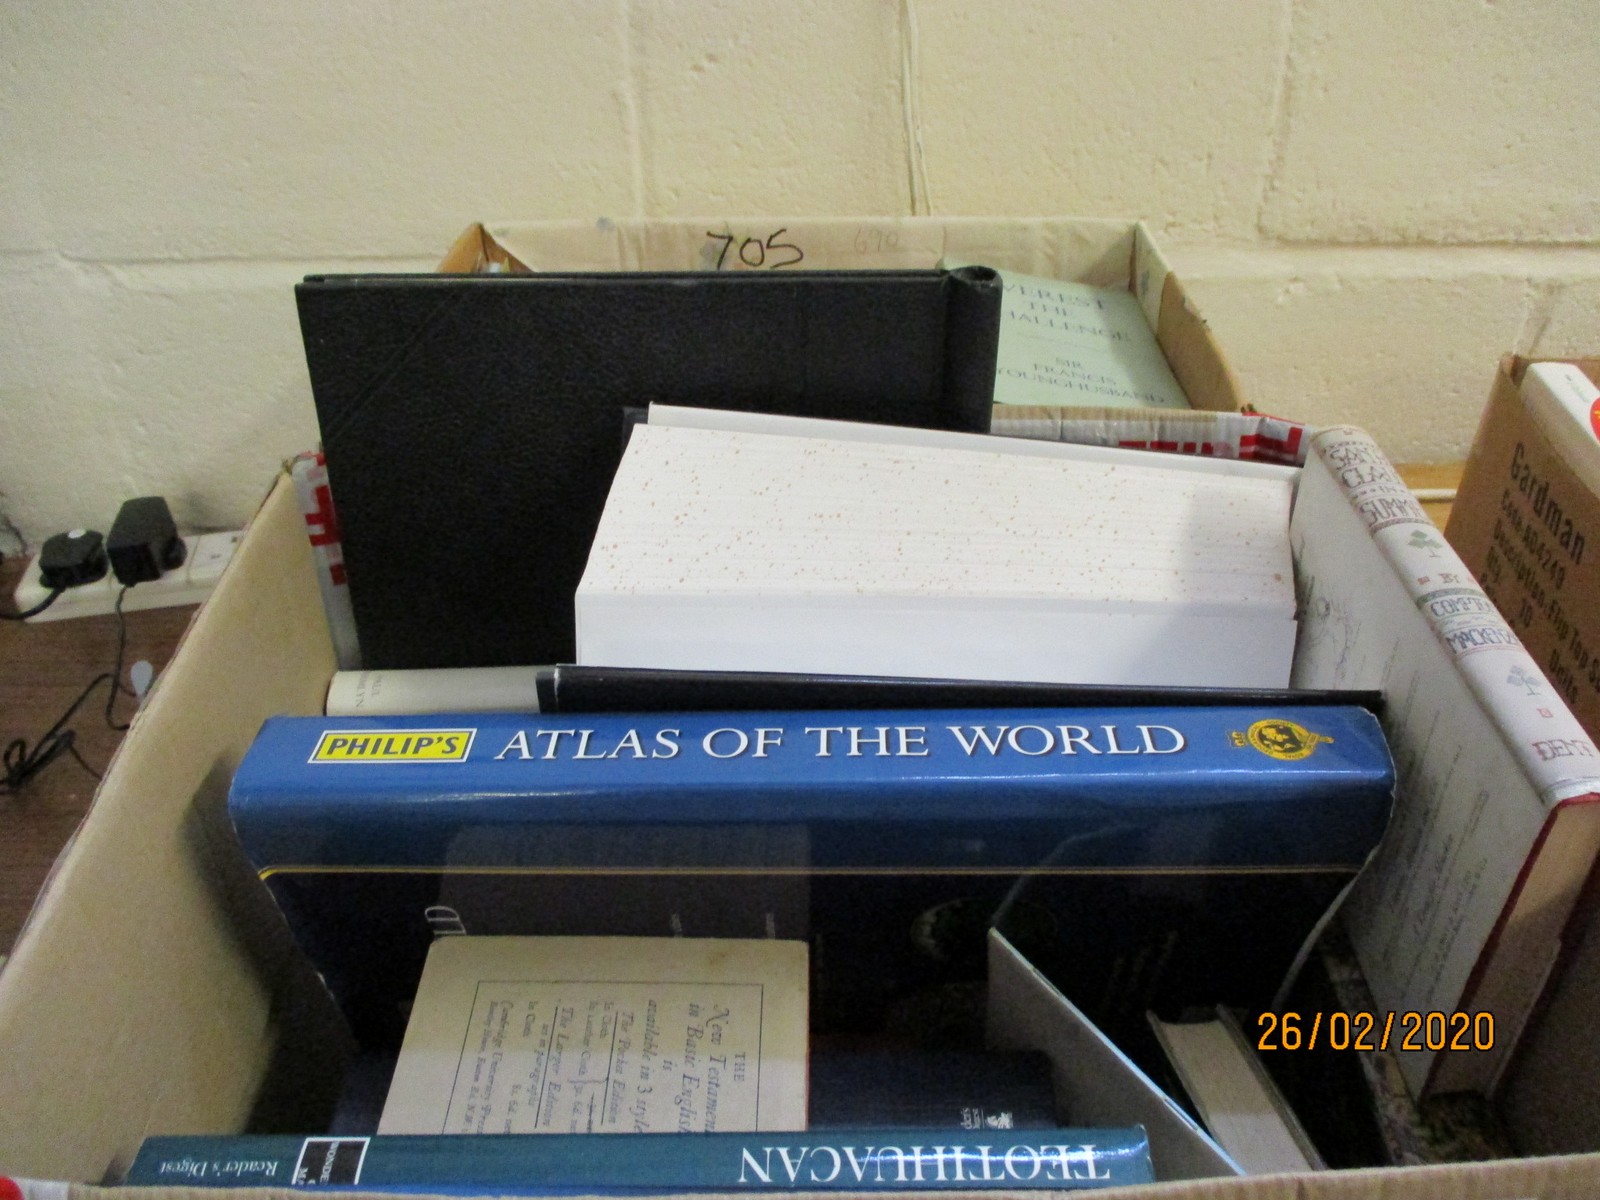 TWO BOXES OF MIXED BOOKS